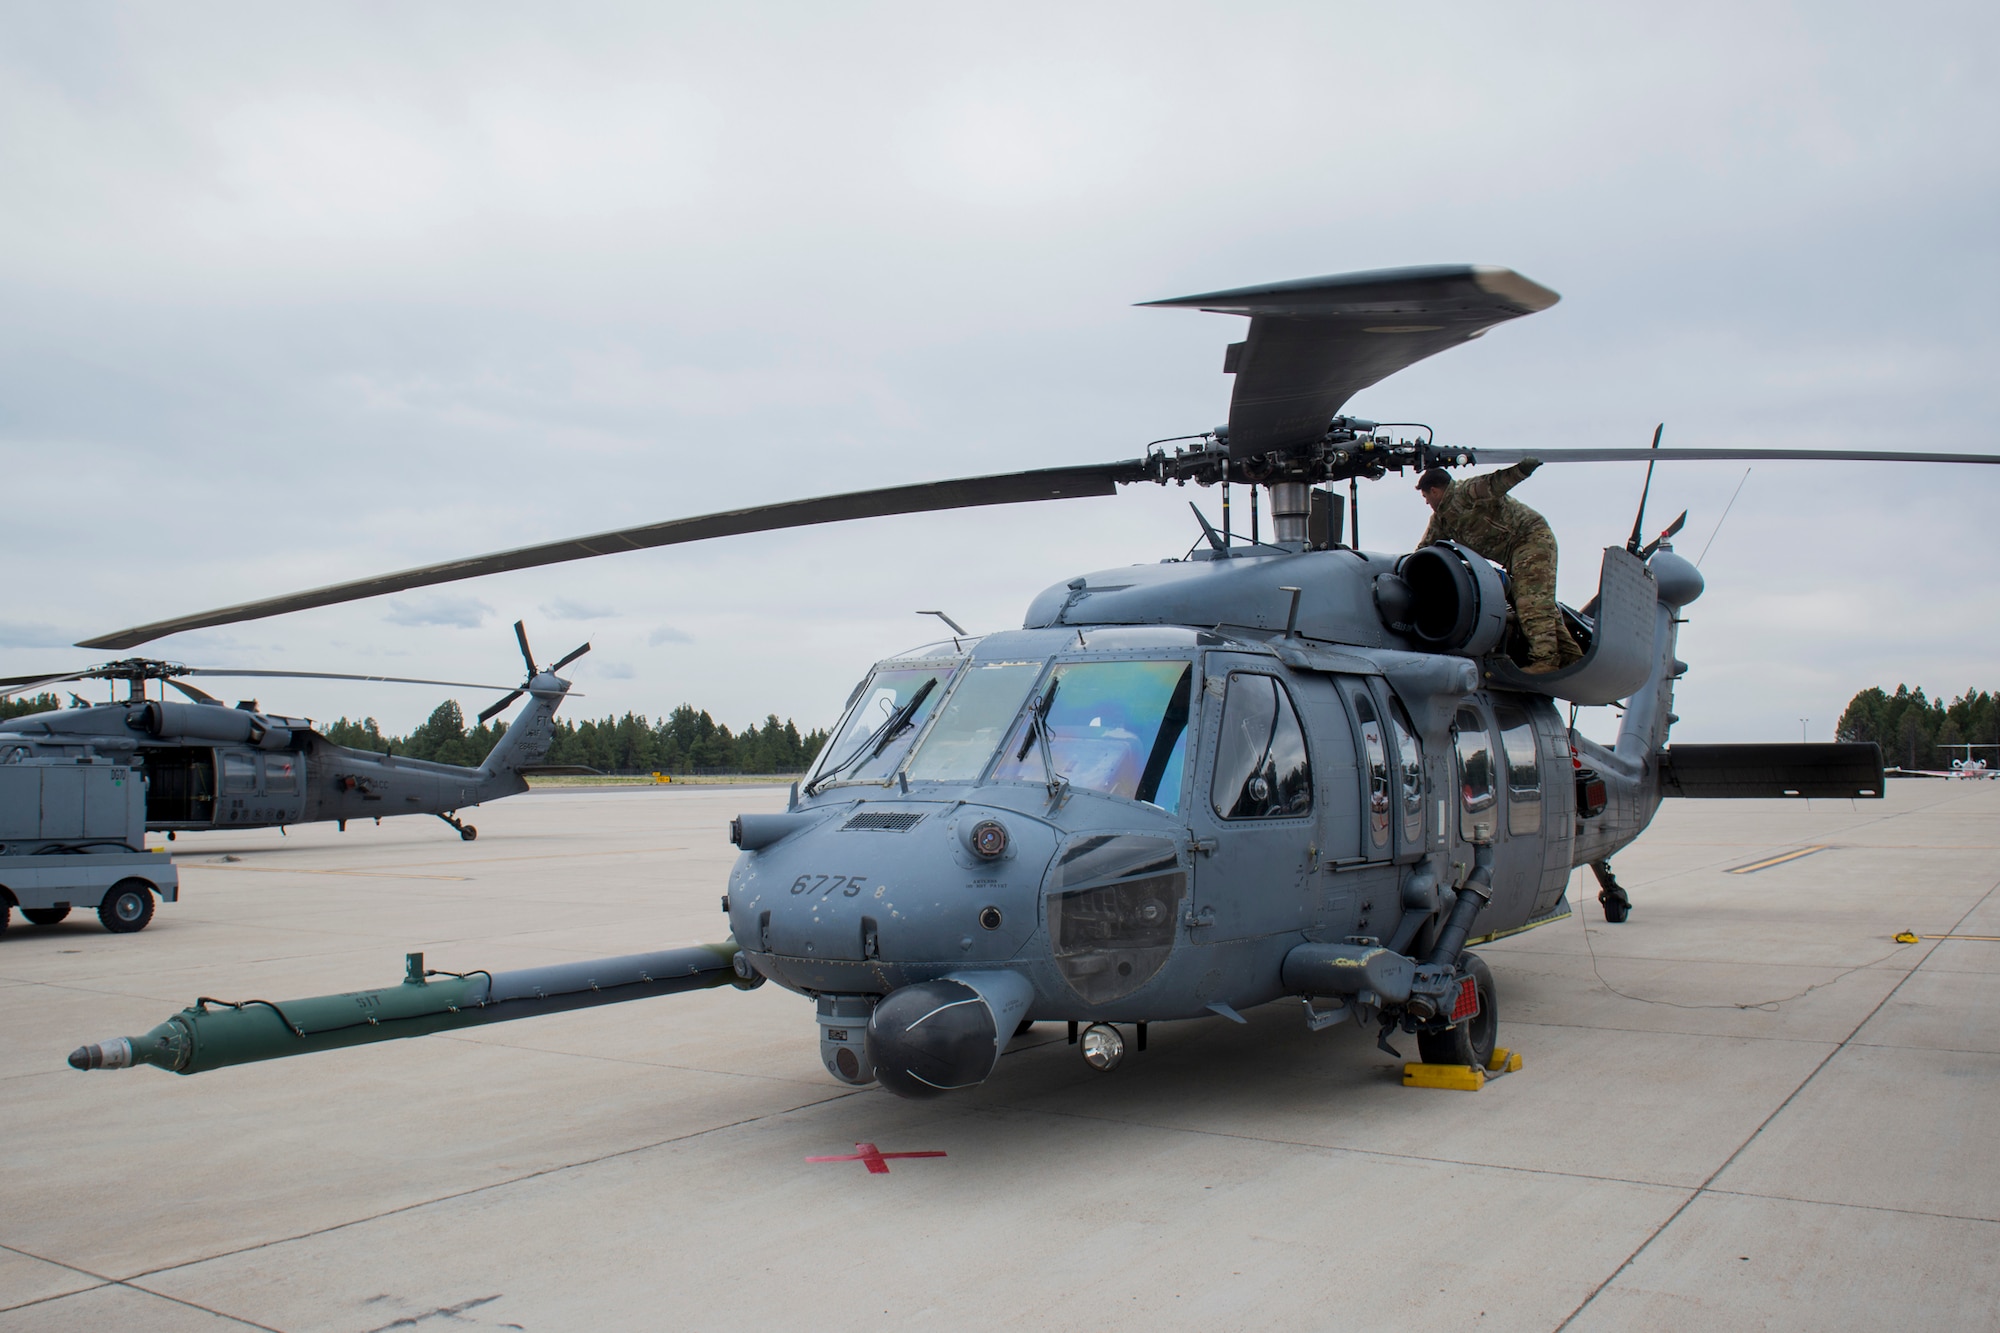 U.S. Air Force Tech. Sgt. Vincent Hnat, 41st Rescue Squadron special missions aviator out of Moody Air Force Base, Ga., inspects the rotor blades of an HH-60G Pave Hawk May 6, 2014, at Flagstaff Pulliam Airport, Ariz. Hnat and his air crew operated the HH-60 during Angel Thunder, an exercise that provides personnel recovery and combat search and rescue training for combat air crews, pararescue, intelligence personnel, battle managers and joint search and rescue center personnel. (U.S. Air Force photo by Staff Sgt. Jamal D. Sutter/Released) 